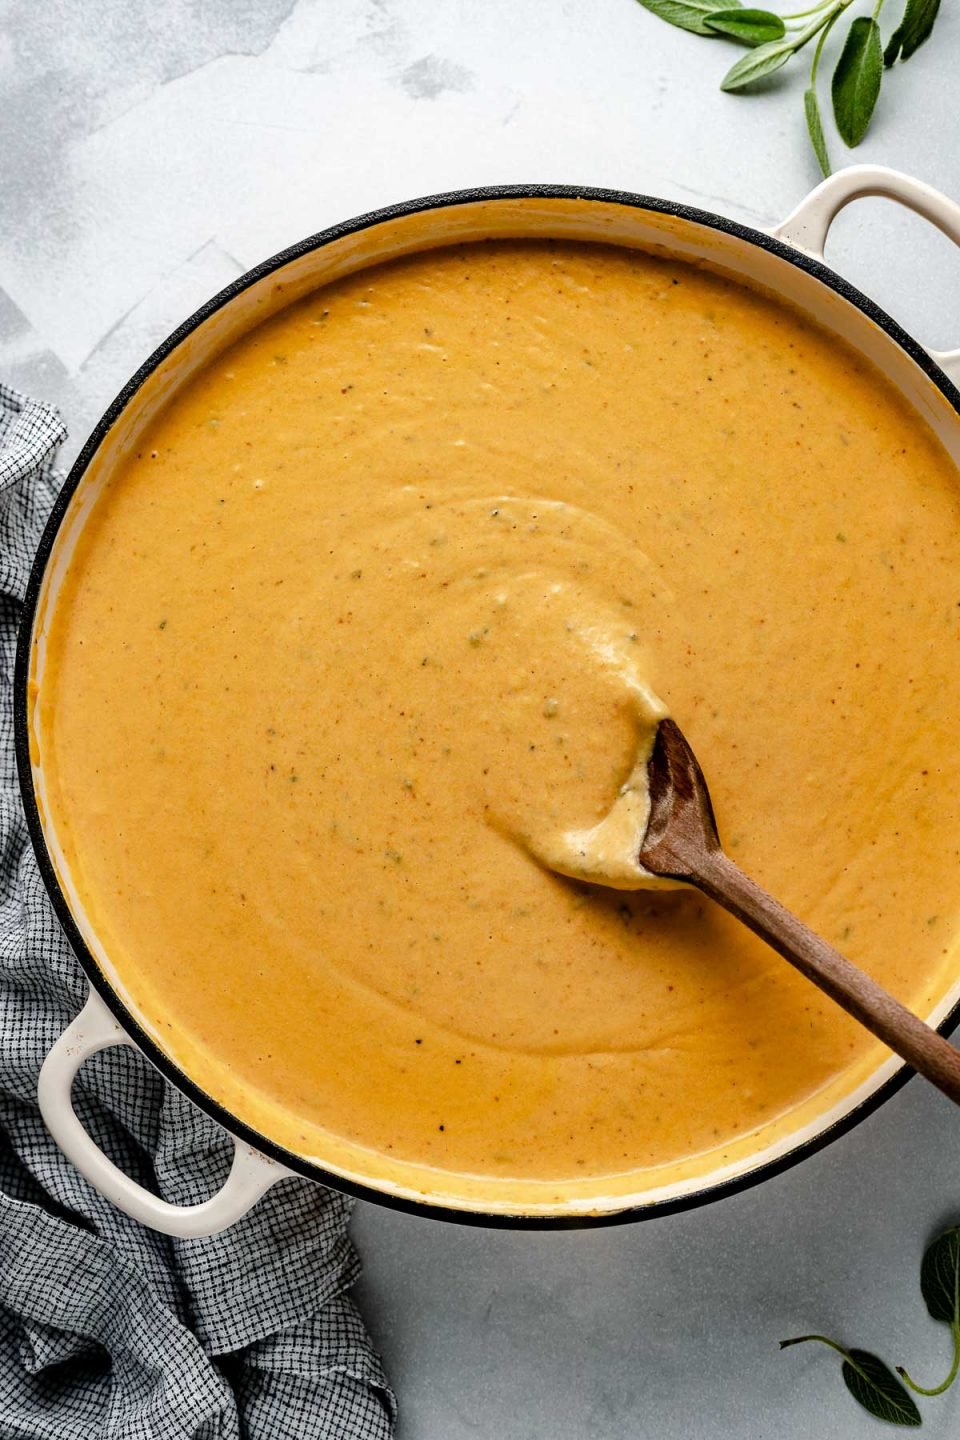 Creamy Pumpkin Mornay sauce in a large white pan with a wooden spoon stirring it. The pan sits atop a light blue surface, next to a checkered linen & fresh sage leaves.